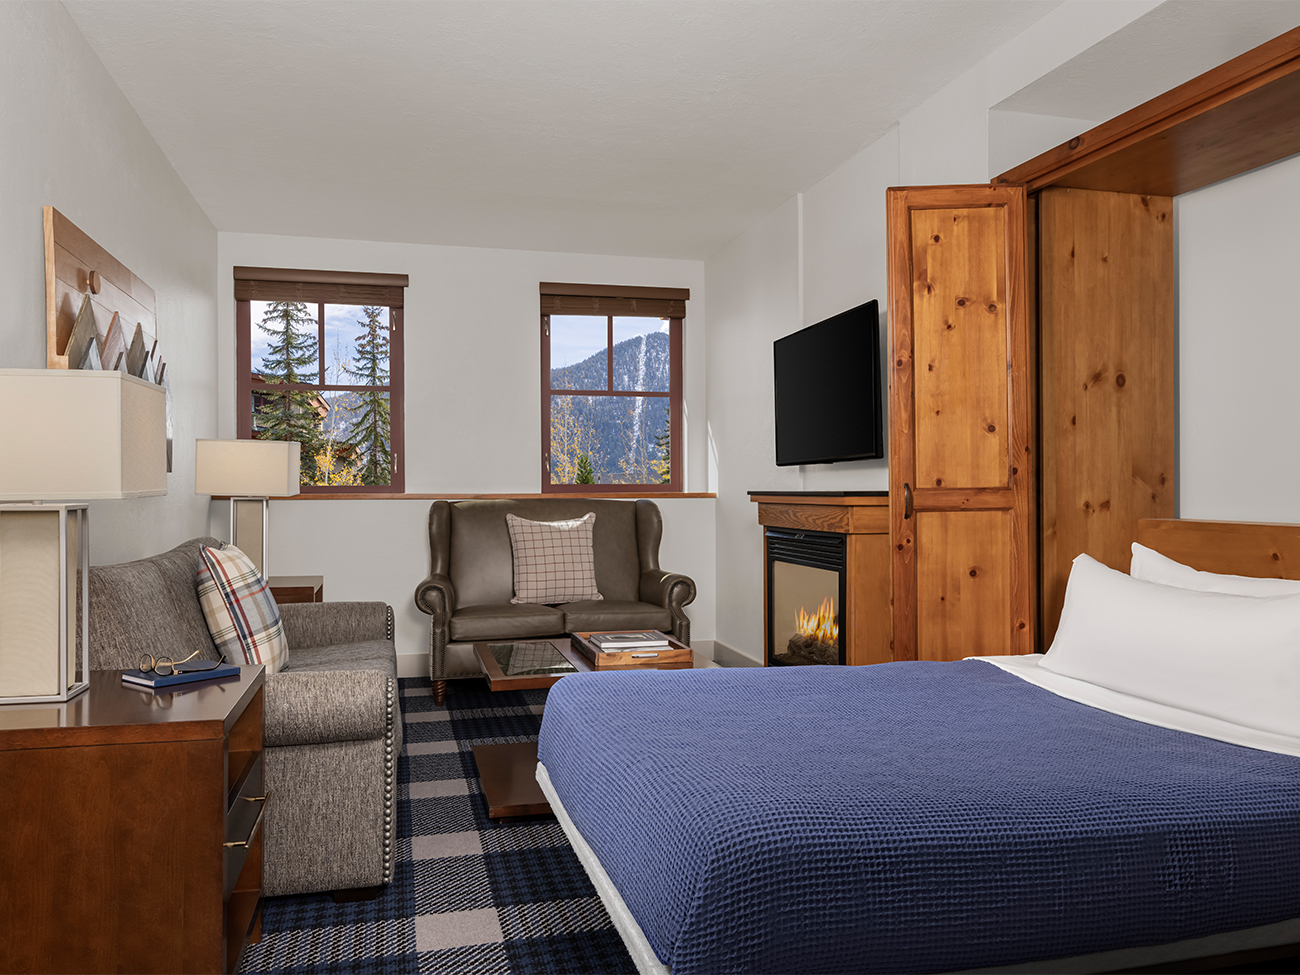 Marriott's Grand Residence Club<span class='trademark'>®</span> 1, Lake Tahoe 3 BR Villa Murphy Bed. Marriott's Grand Residence Club<span class='trademark'>®</span> 1, Lake Tahoe is located in South Lake Tahoe, California United States.